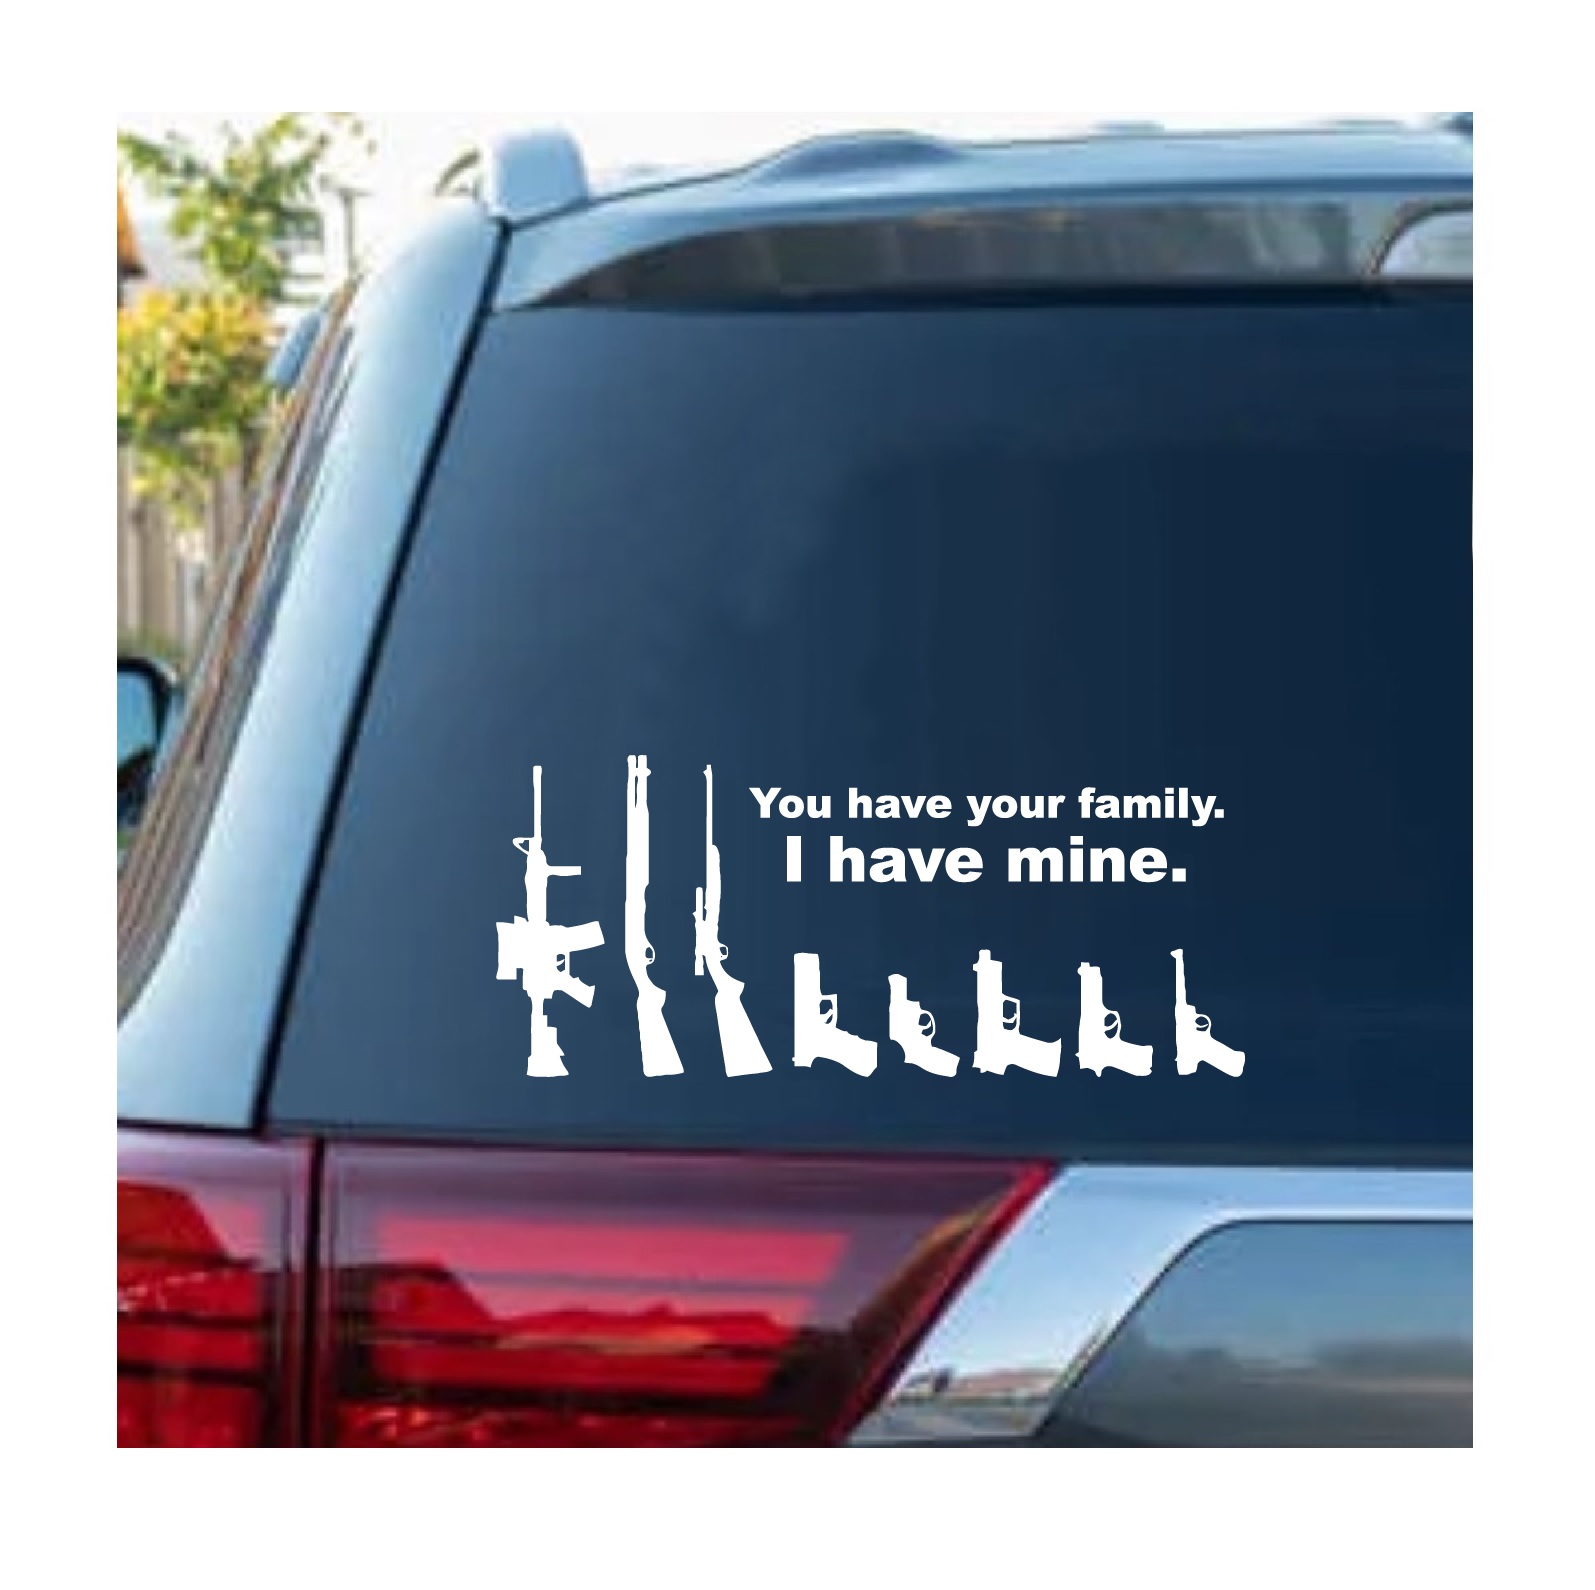 Car Stickers - Custom Vinyl Stickers for Cars